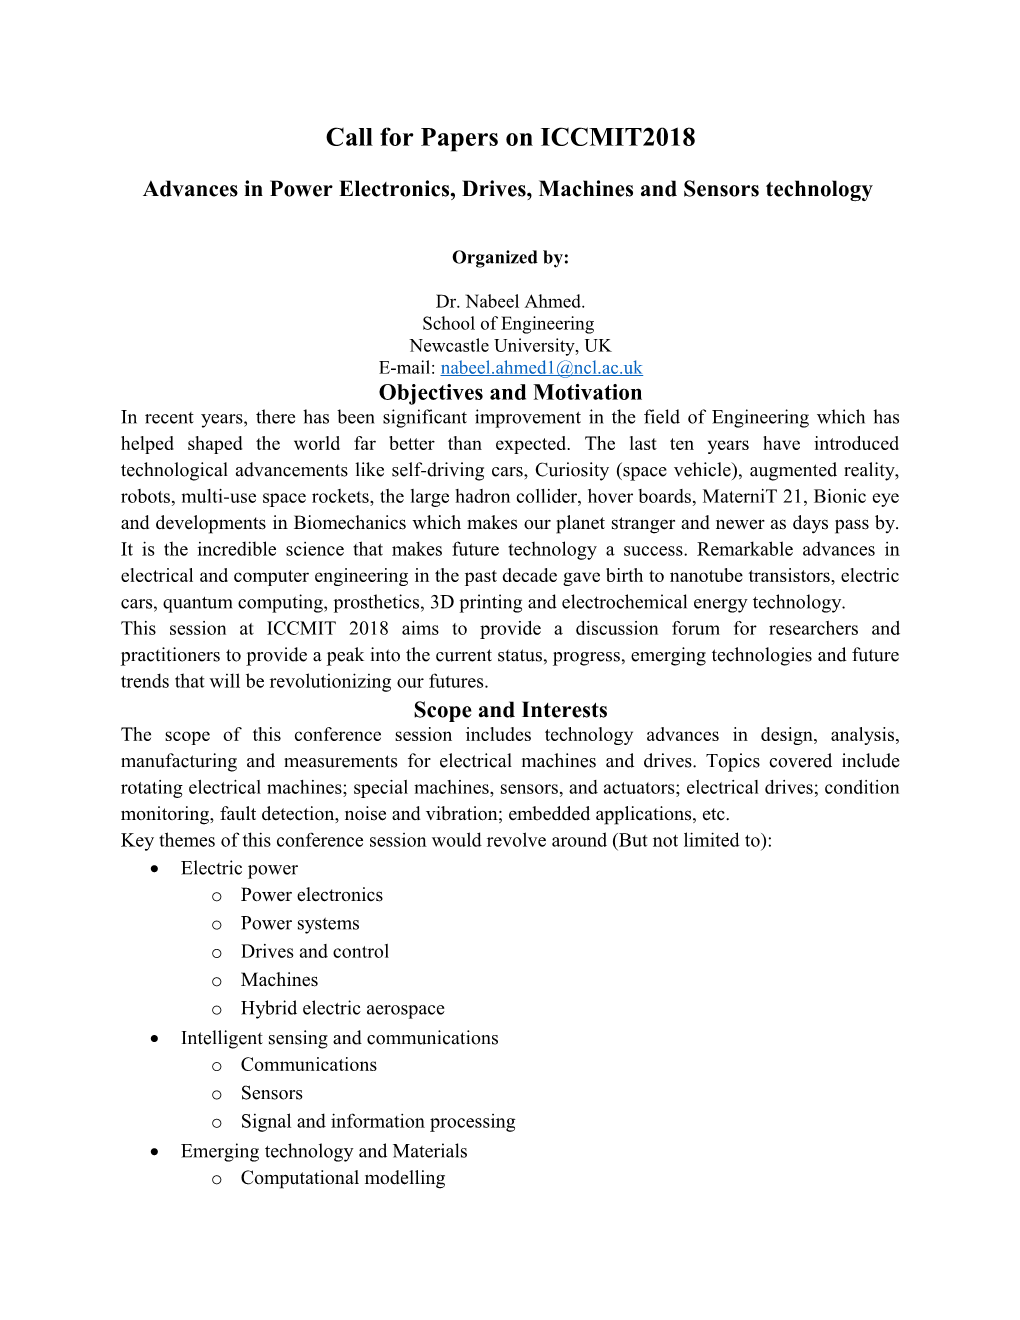 Advances in Power Electronics, Drives, Machines and Sensors Technology